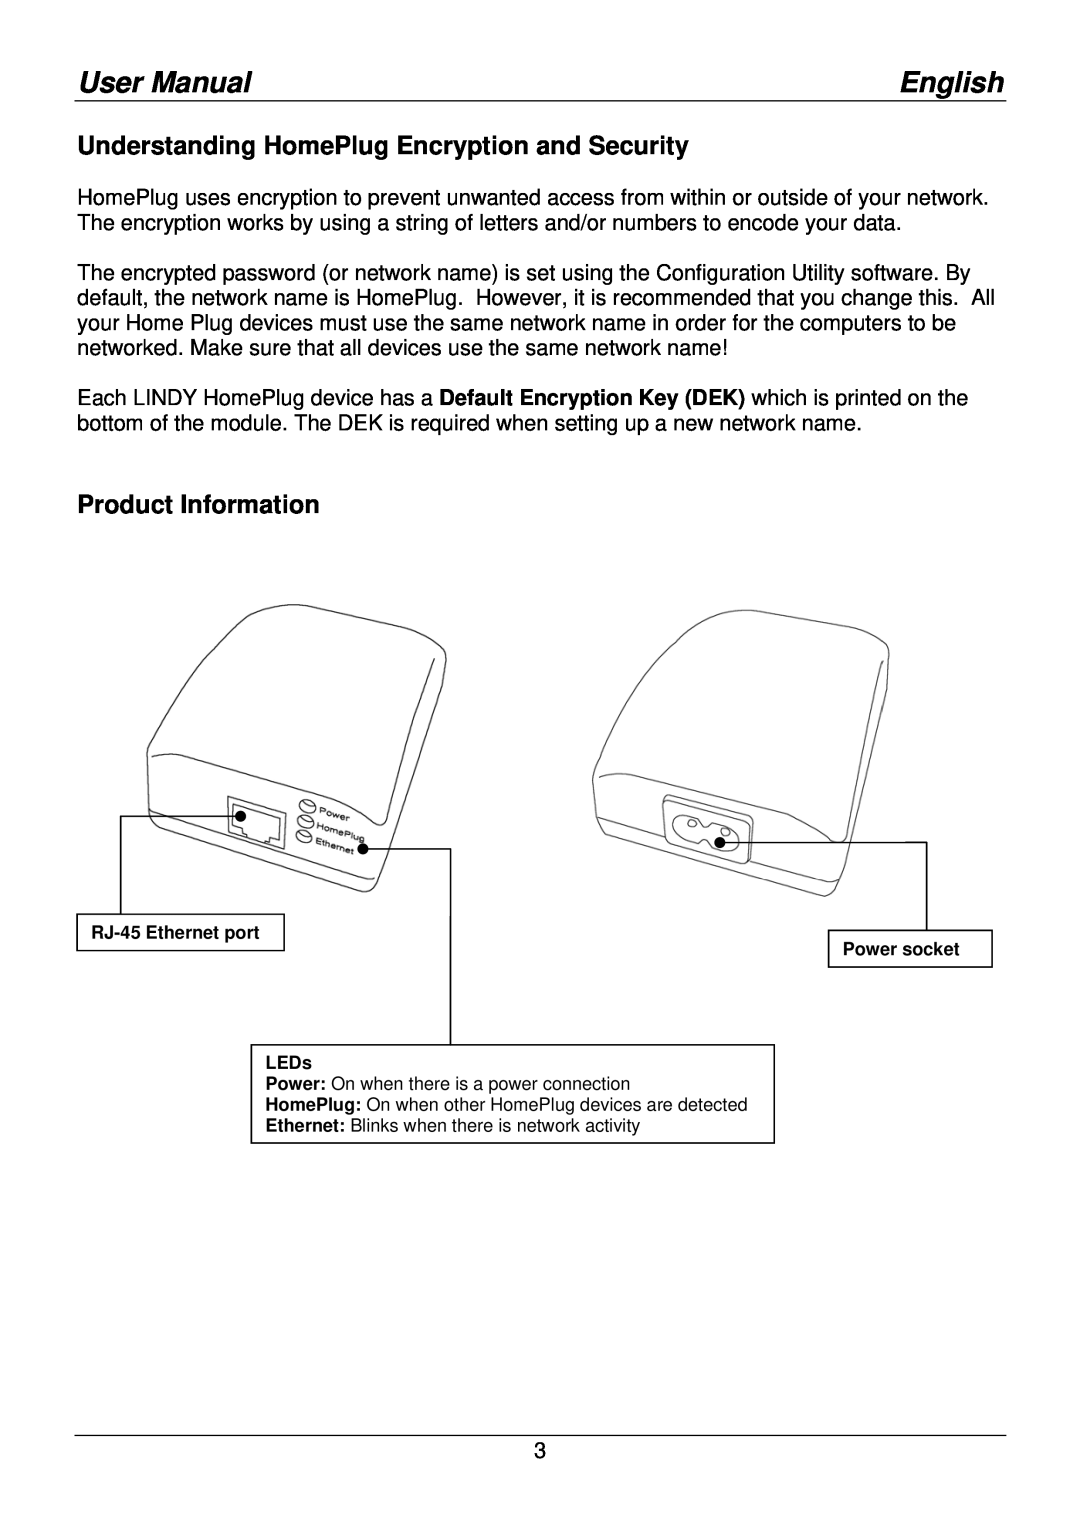 Lindy 25130 Understanding HomePlug Encryption and Security, Product Information, User Manual, English, Power socket 